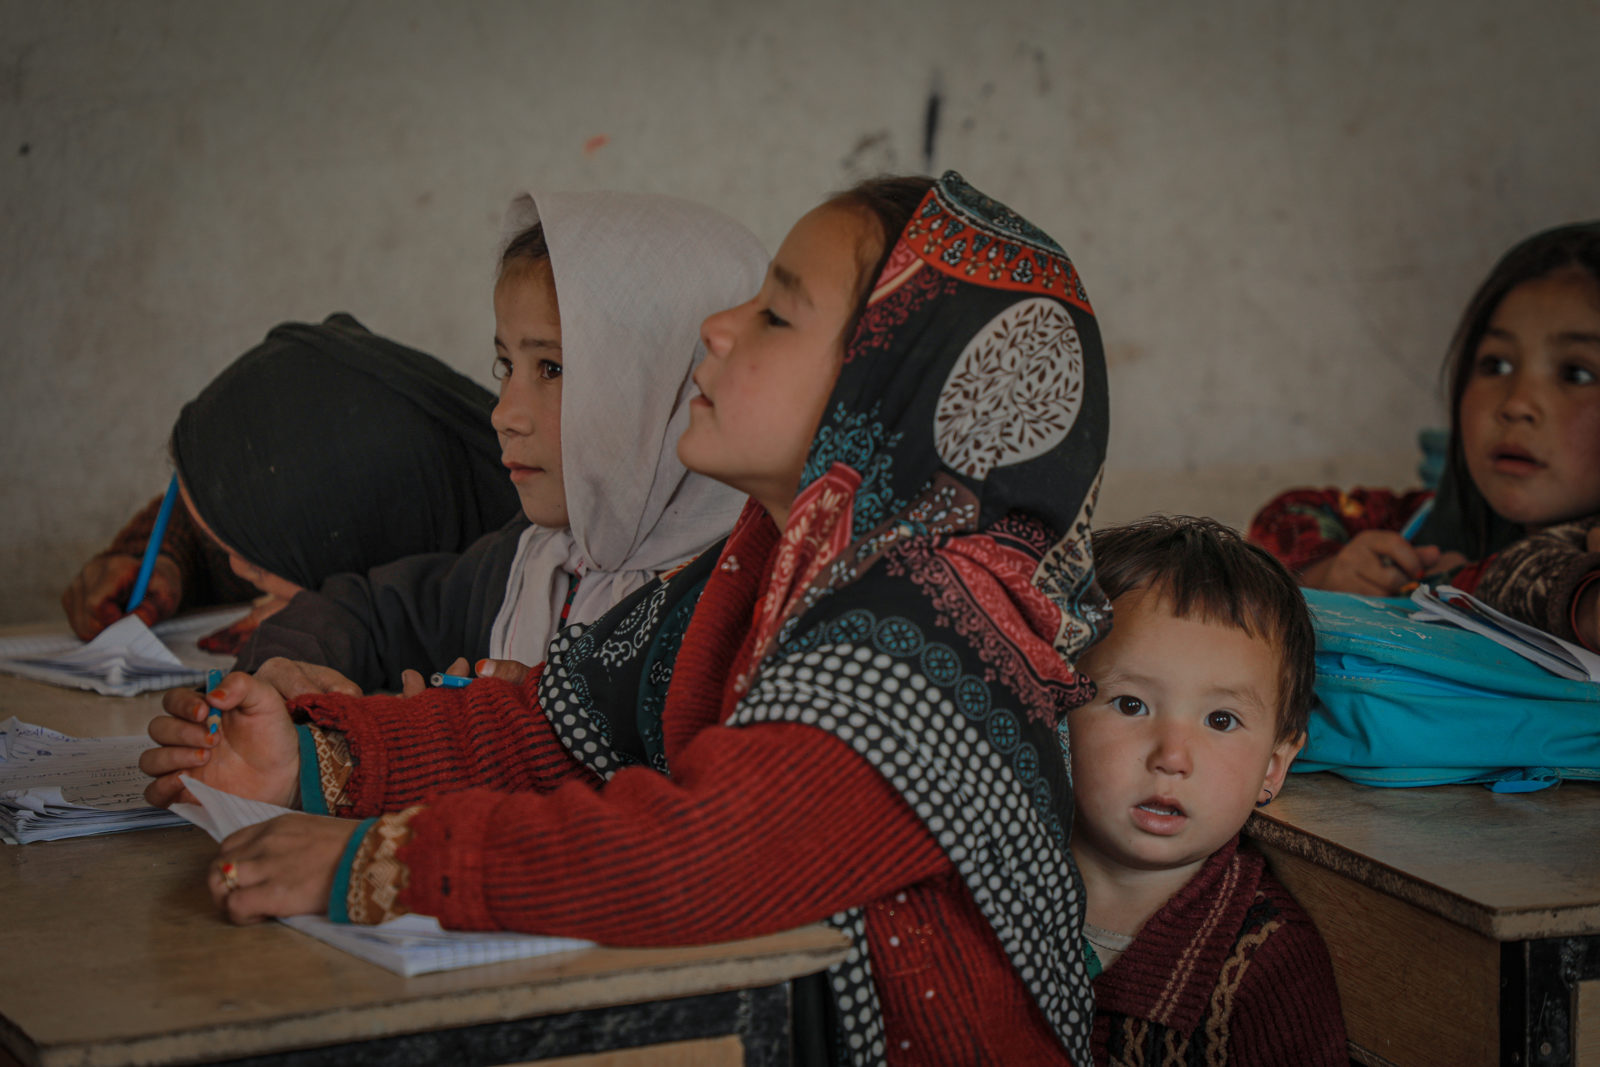 A photo of school girls with headscarves in a classroom